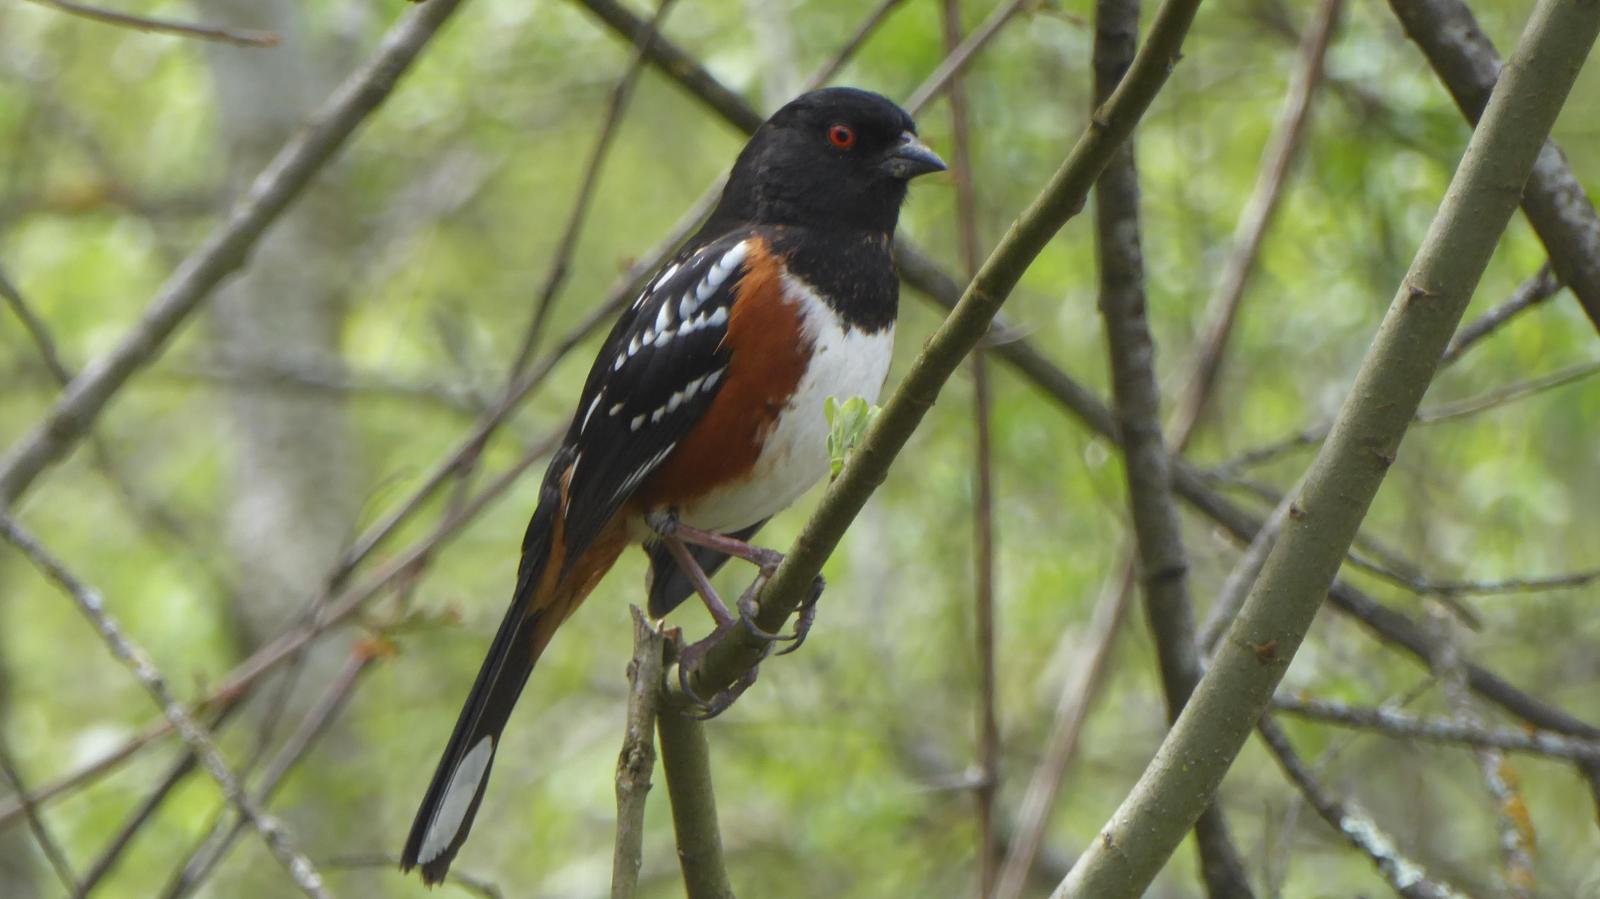 Spotted Towhee Photo by Daliel Leite